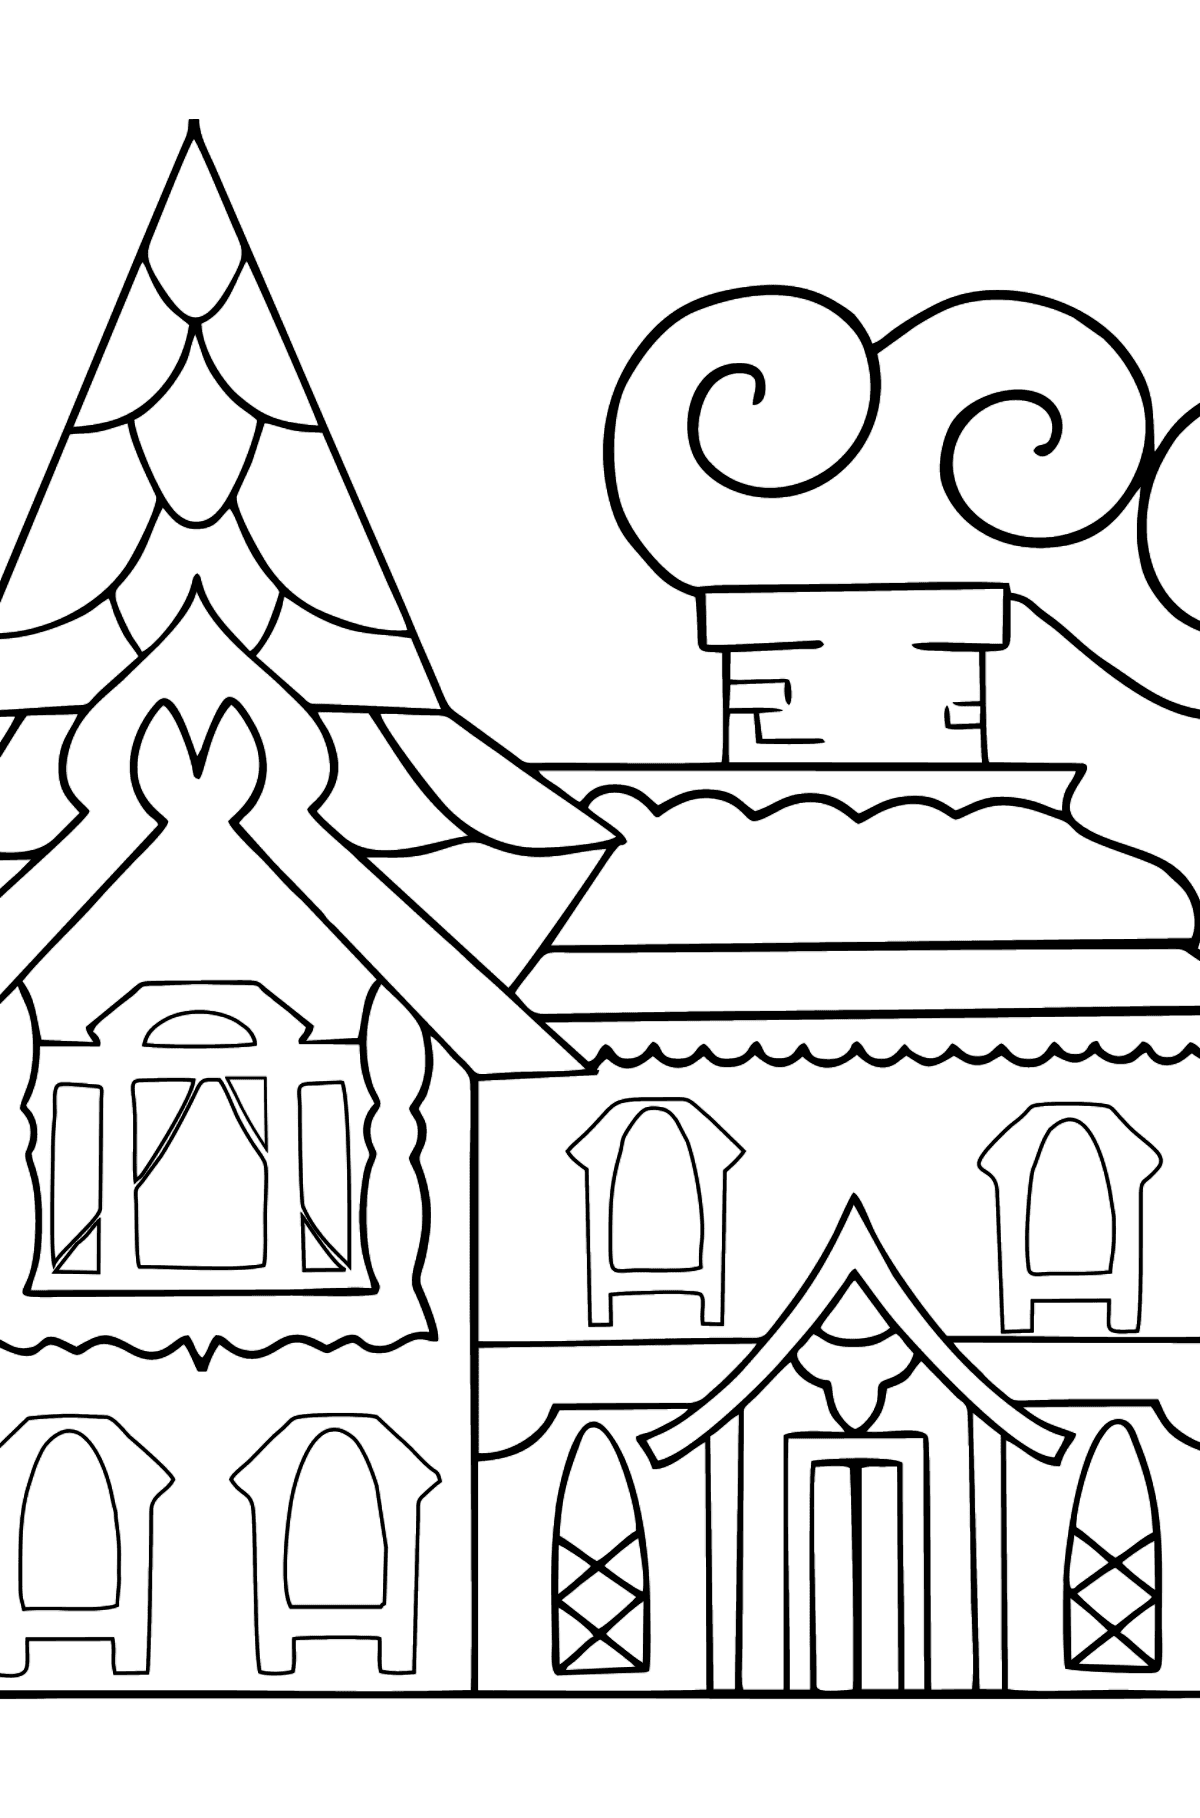 House castle coloring page (Easy) - Coloring Pages for Kids